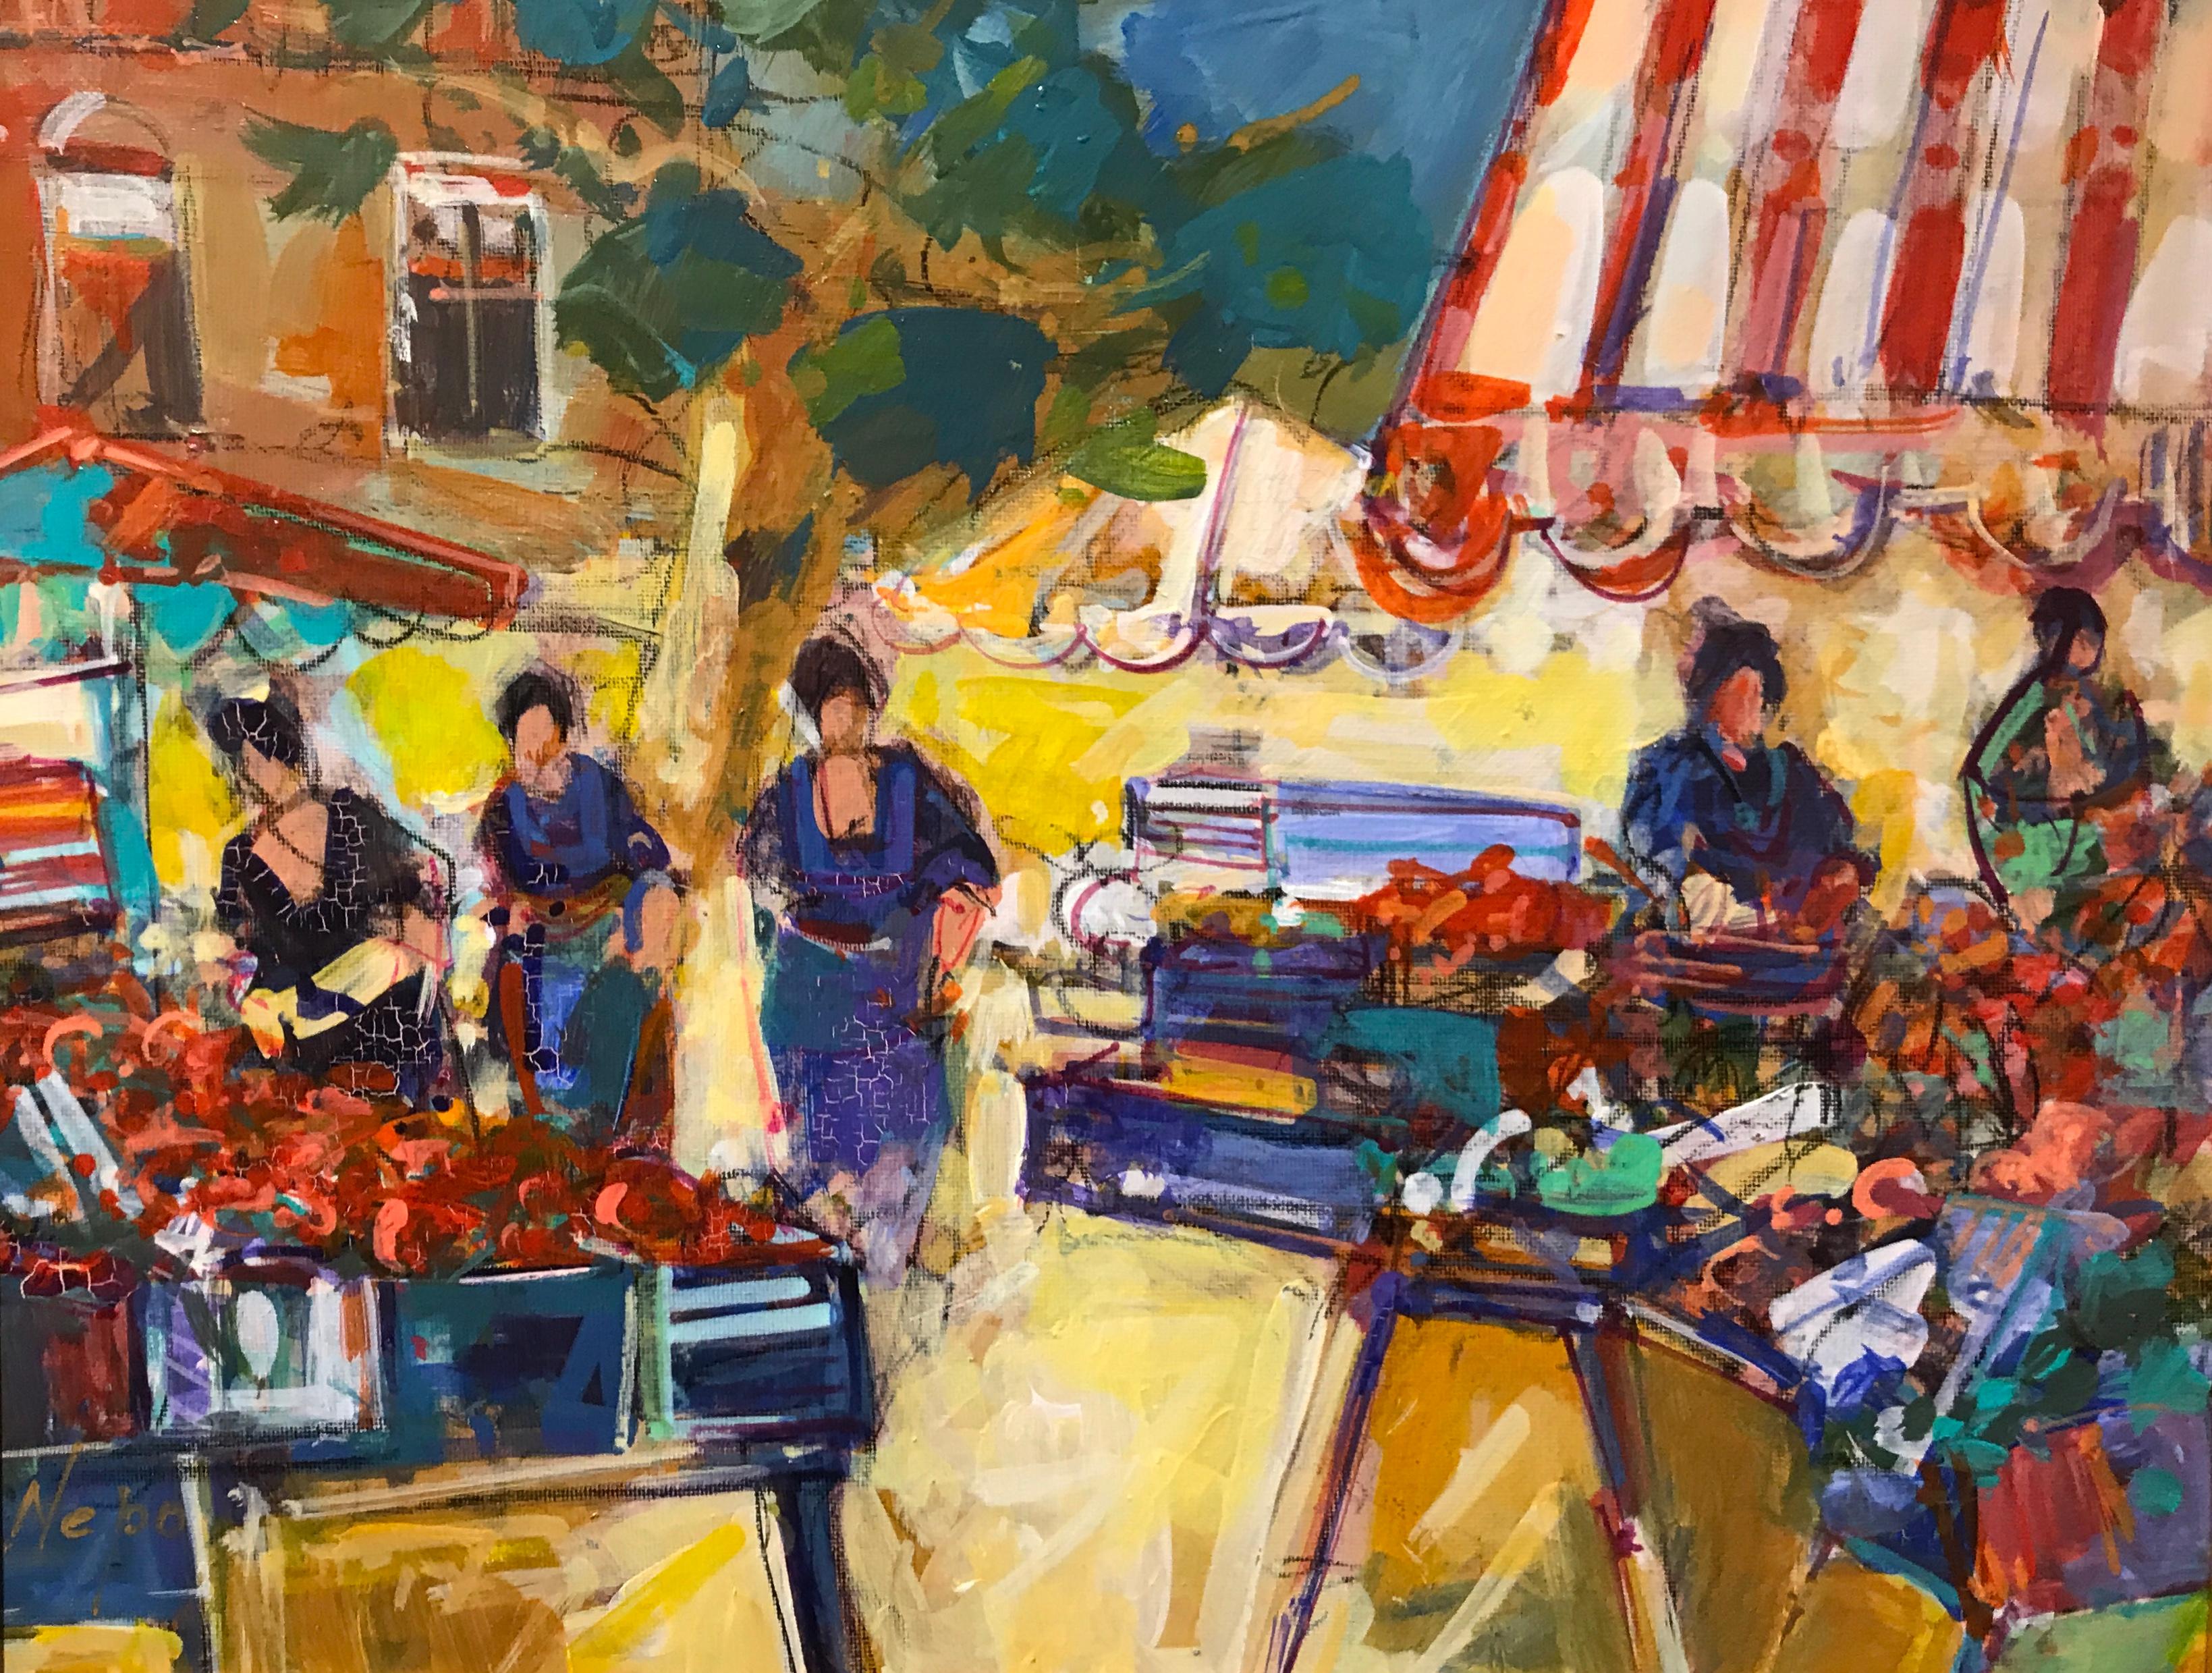 'Market with Striped Umbrella' is a small oil on canvas painting created by French artist Christian Nepo in the 21st century. Conceived a decade before his passing in 2016, the painting attracts our attention with its vibrant palette and joyous